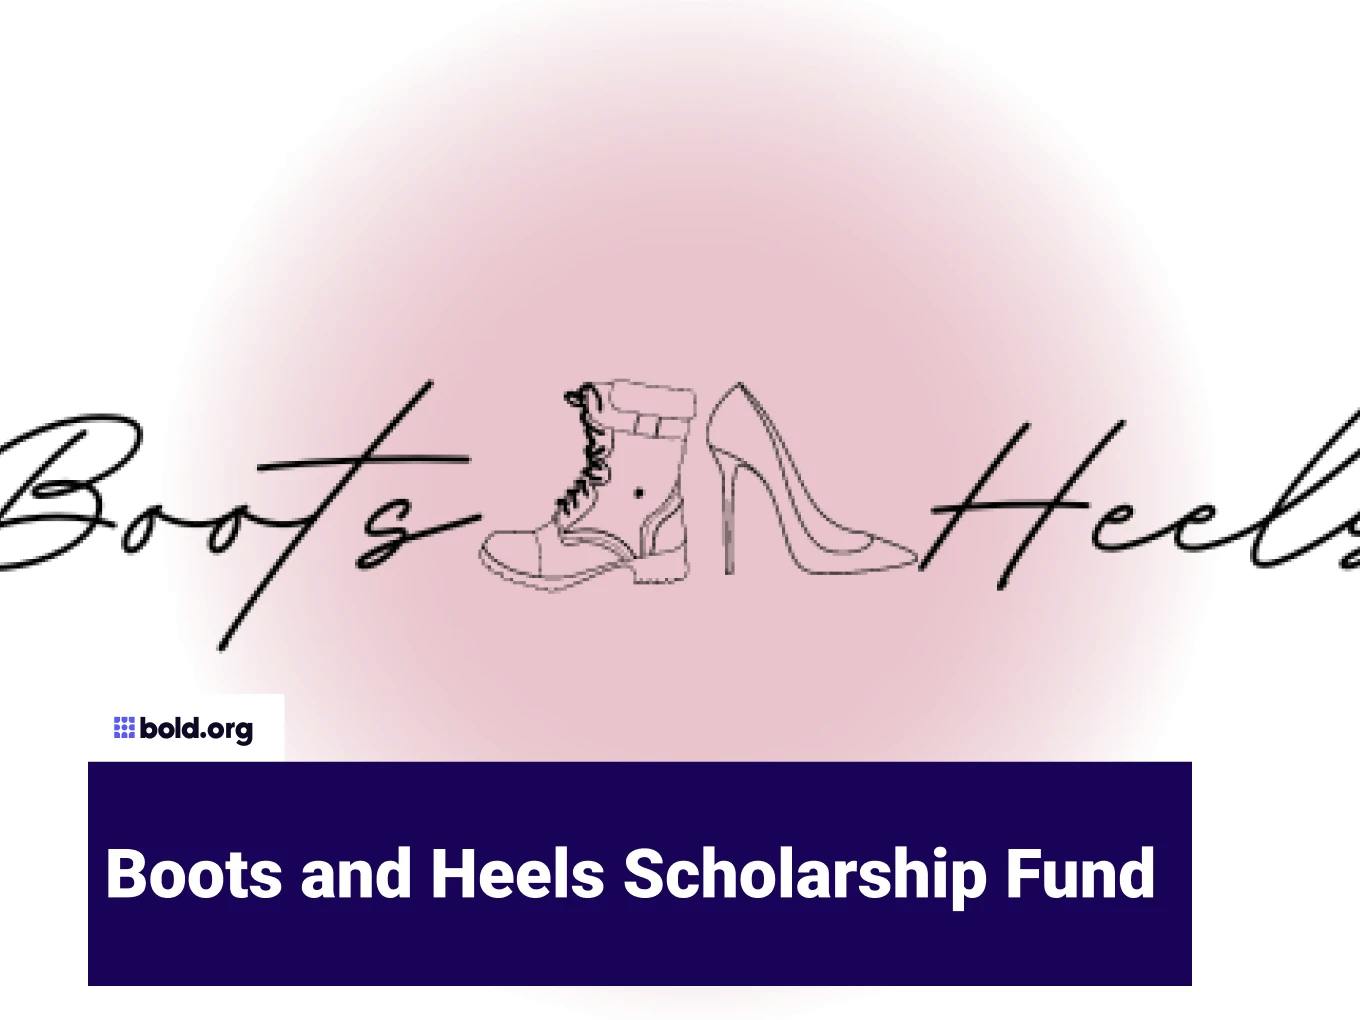 Boots and Heels Scholarship Fund